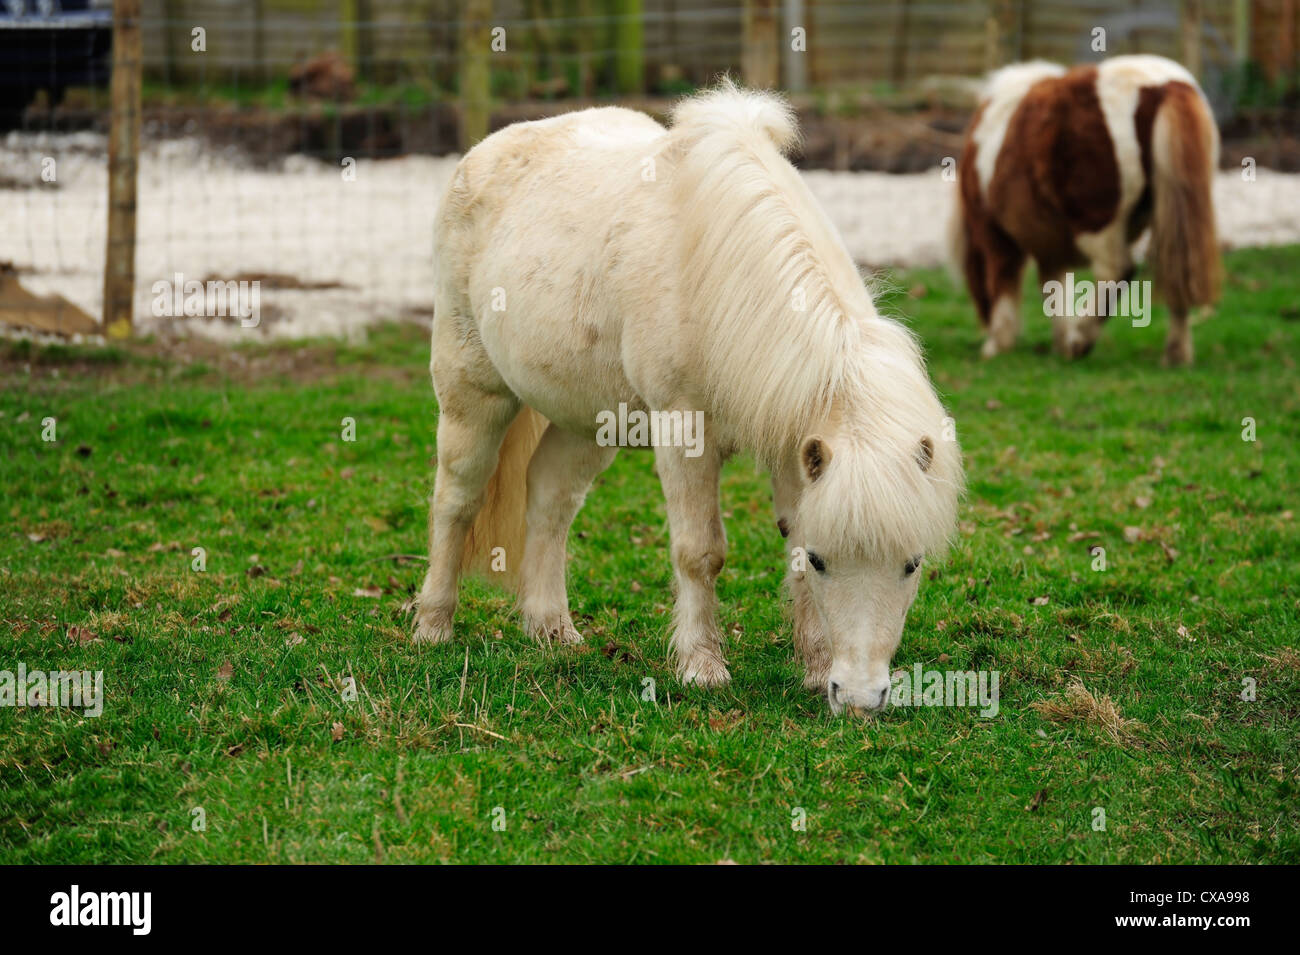 pony in a country park Stock Photo